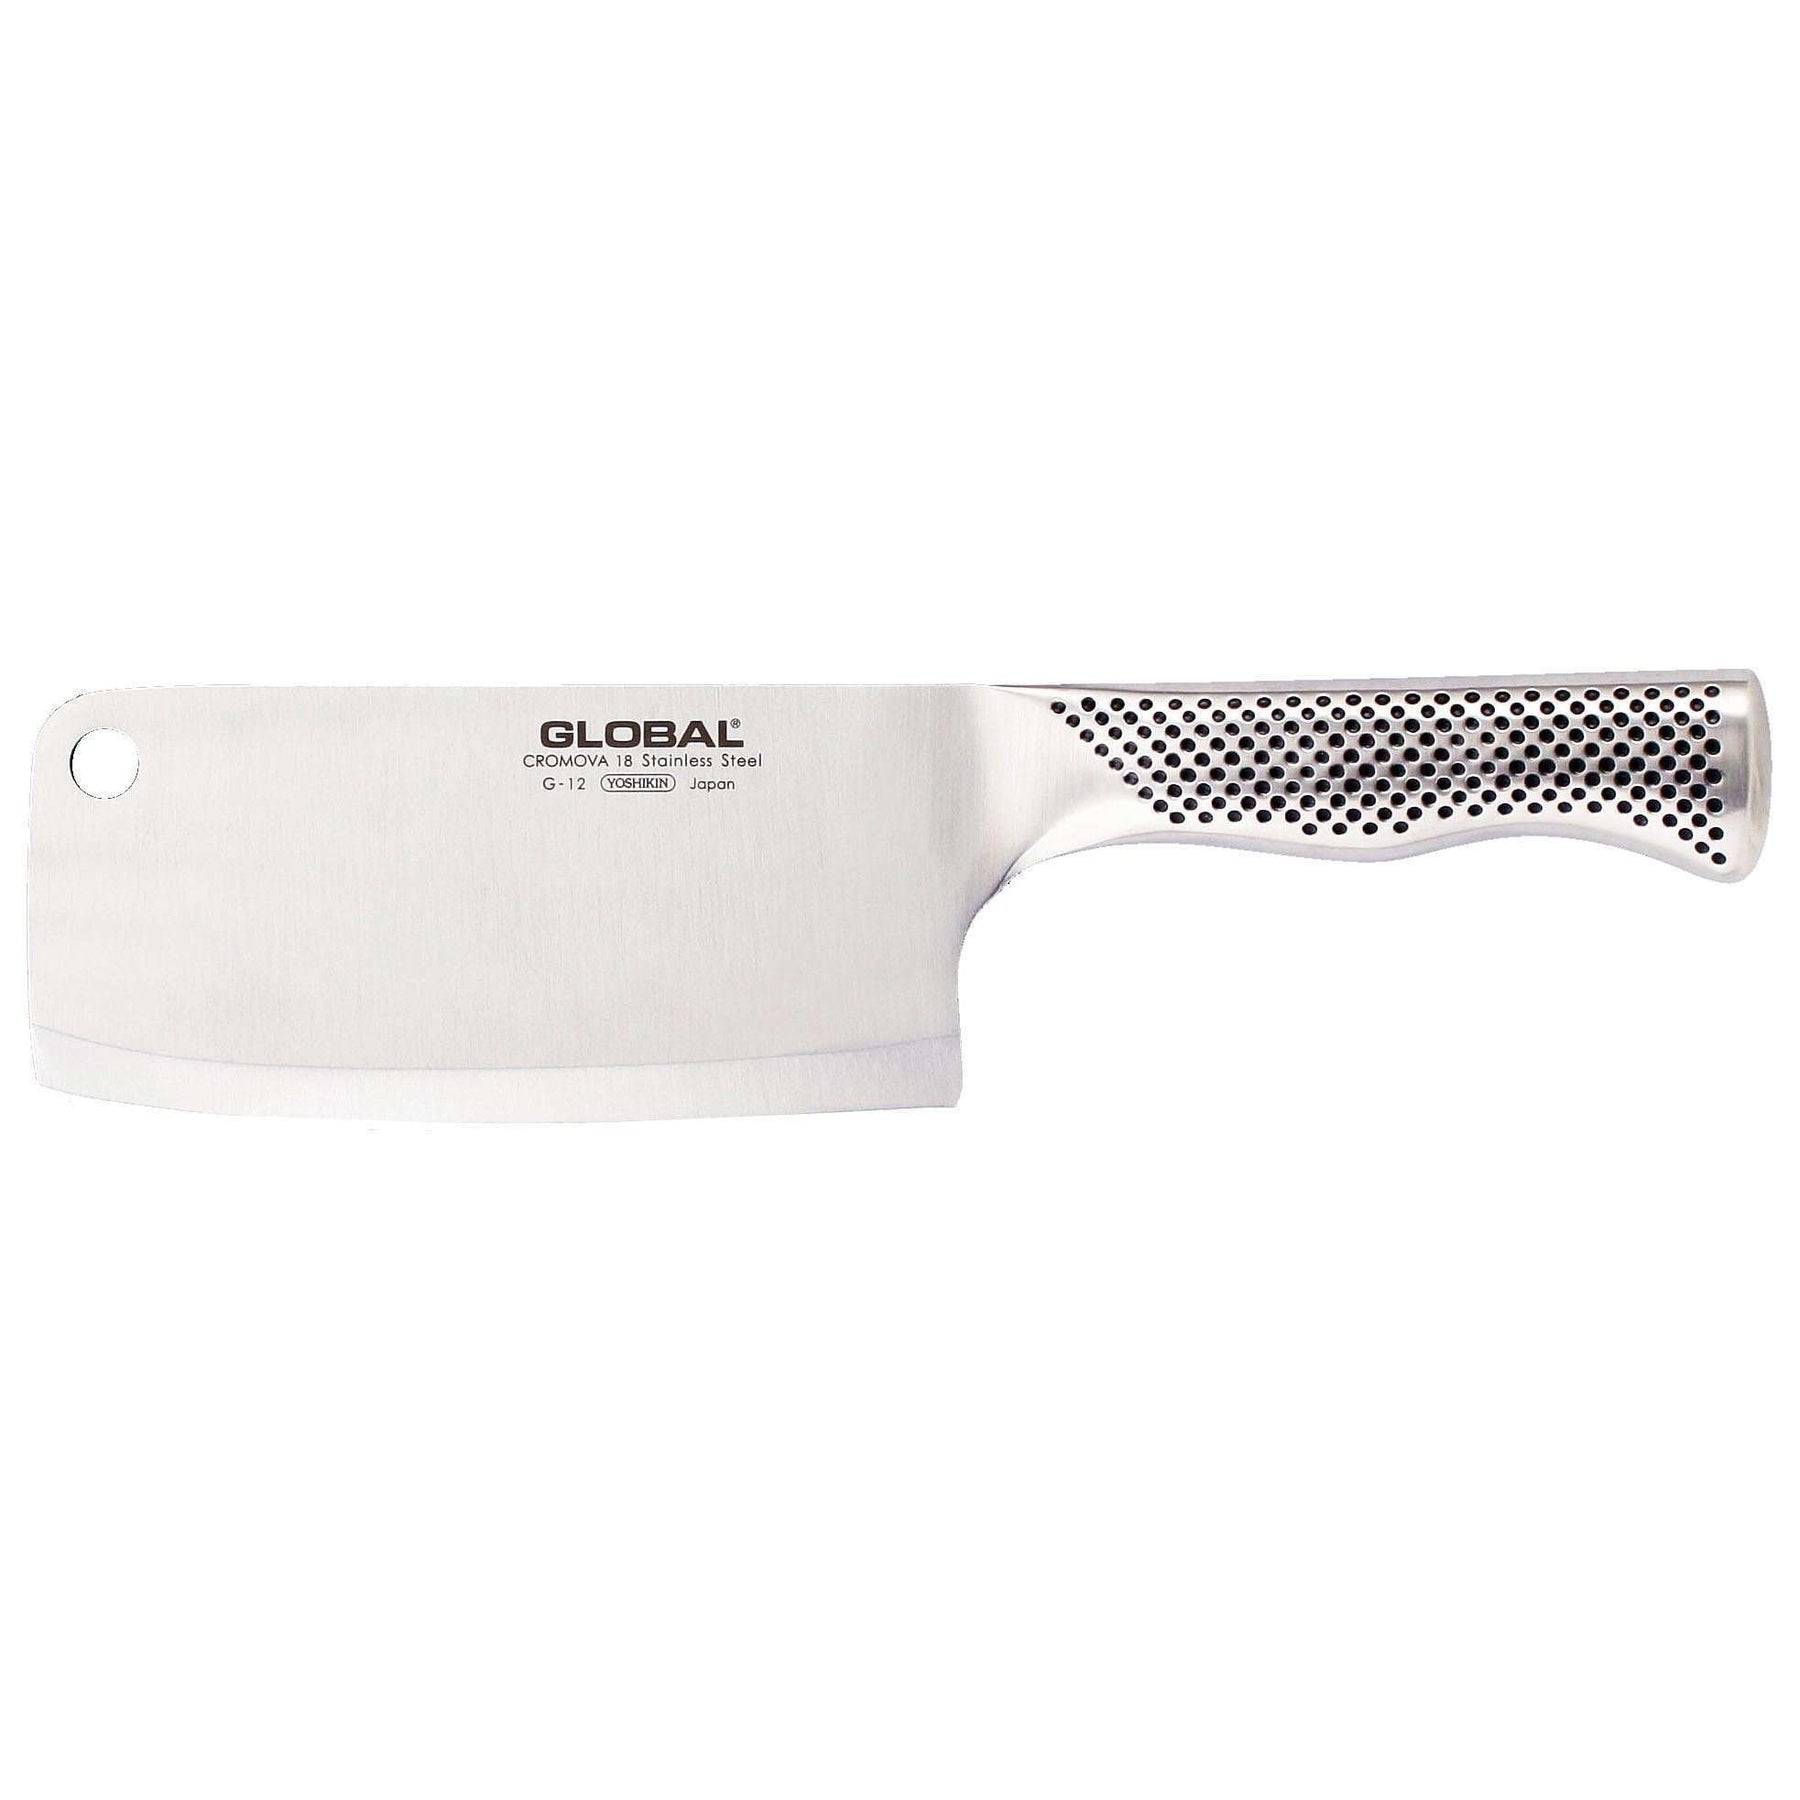 Global G-12 Classic Meat Chopper Cleaver - 79533 for sale online